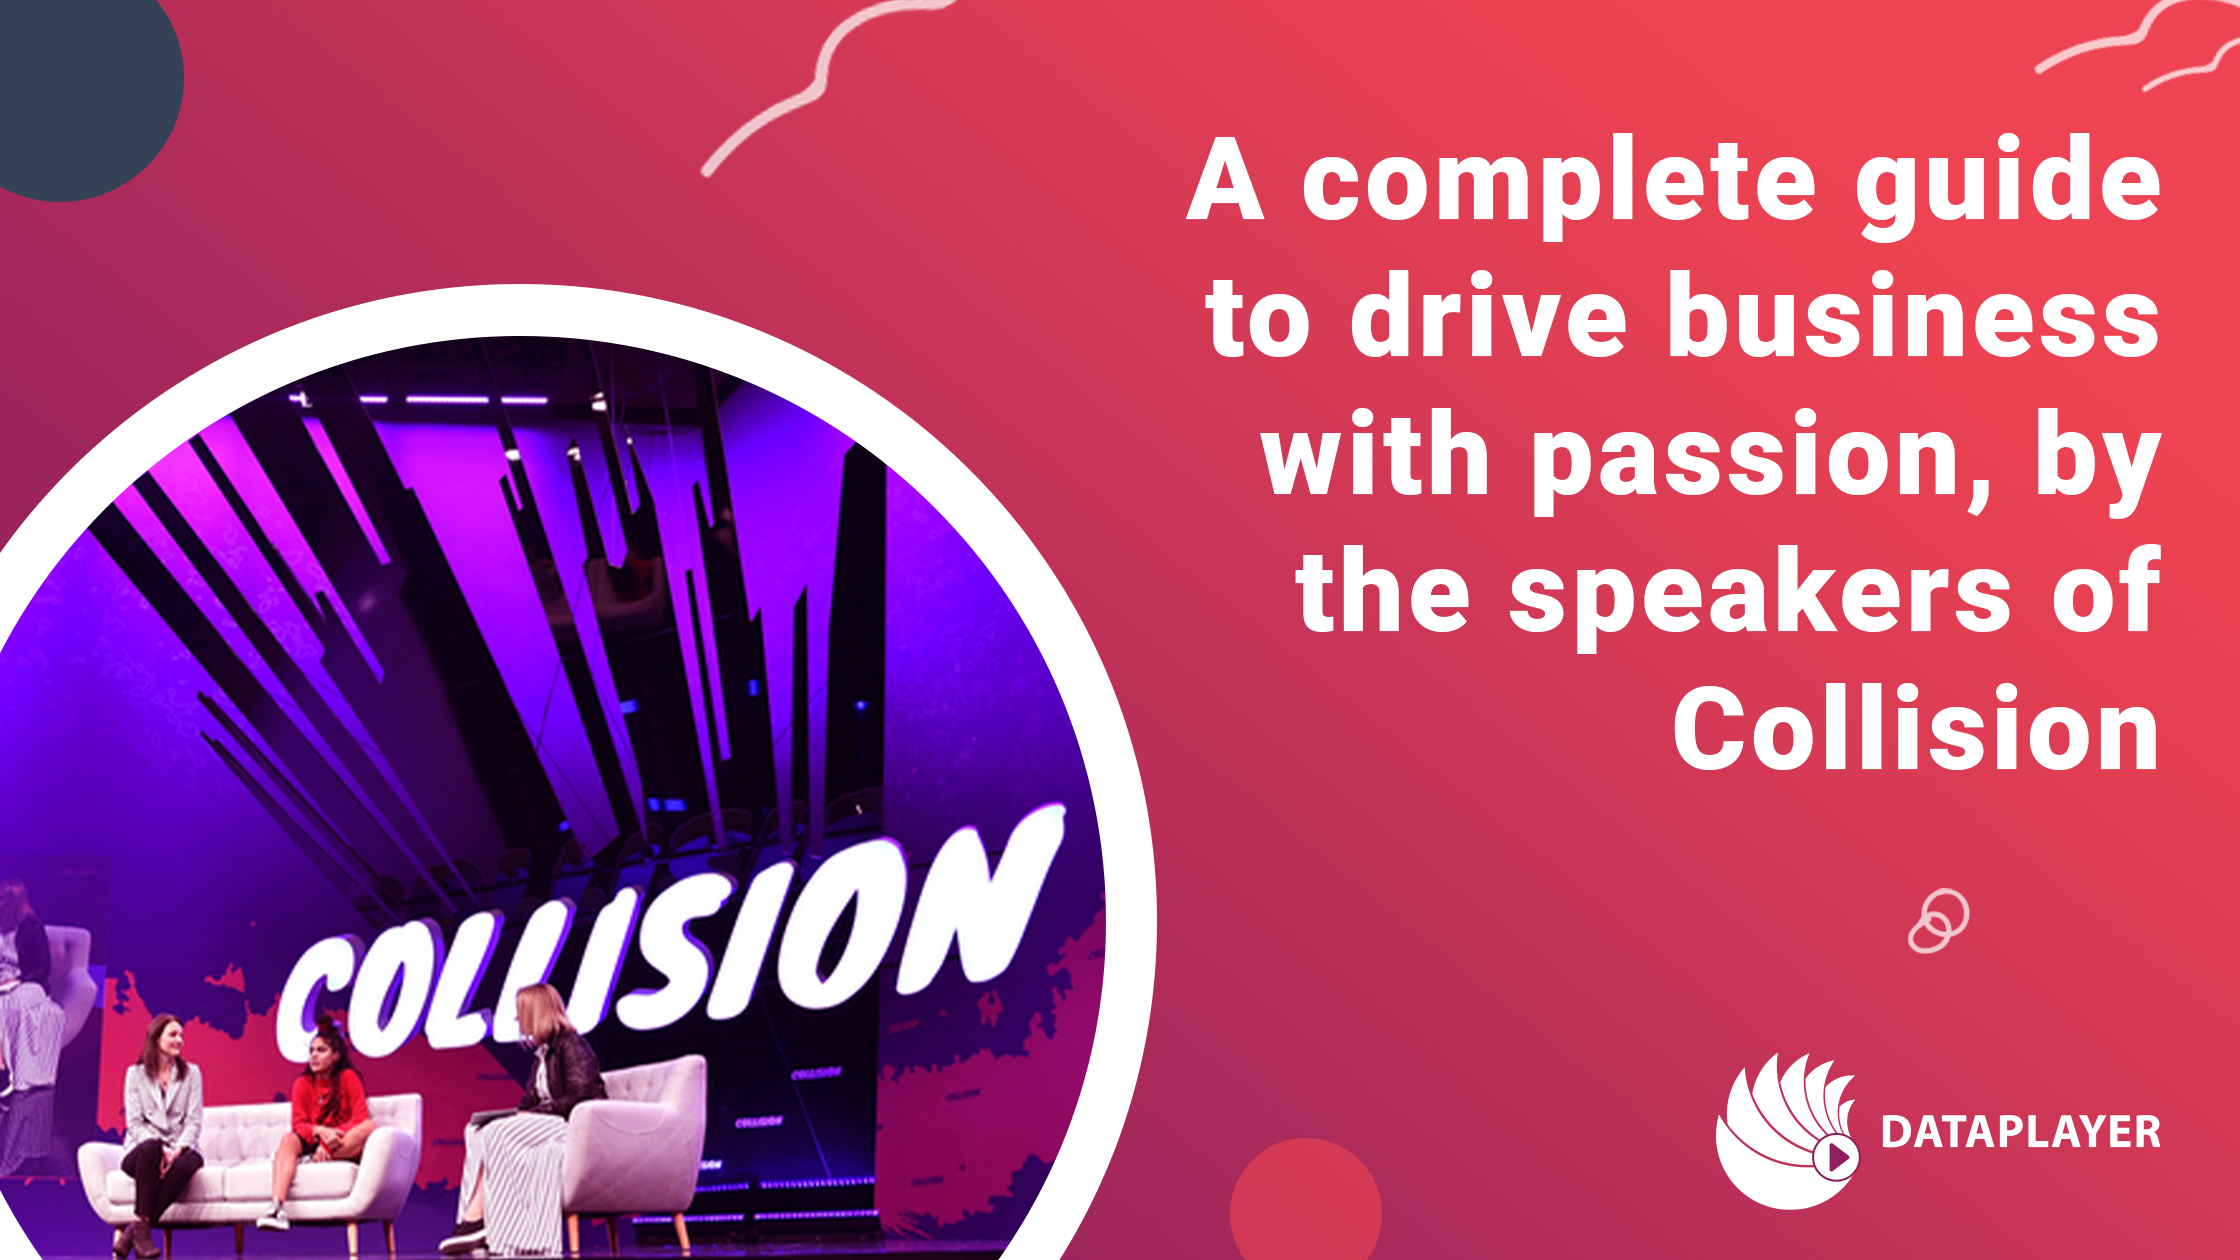 A complete guide to drive business with passion, by the speakers of Collision Conference 2019.